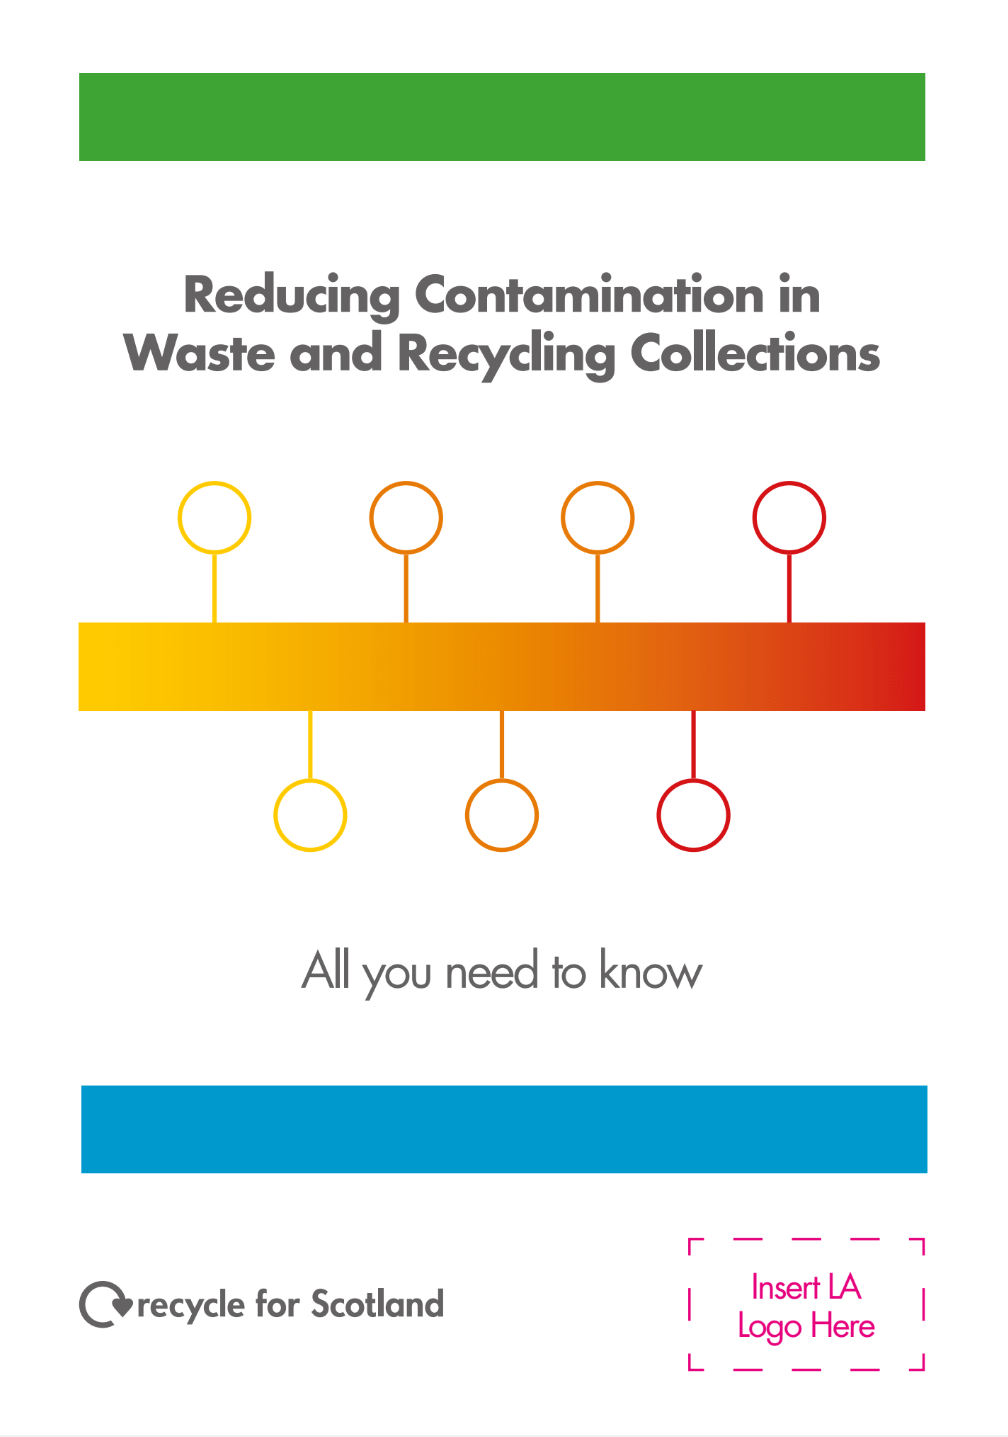 RFS Contamination Information Leaflet for staff and internal stakeholders